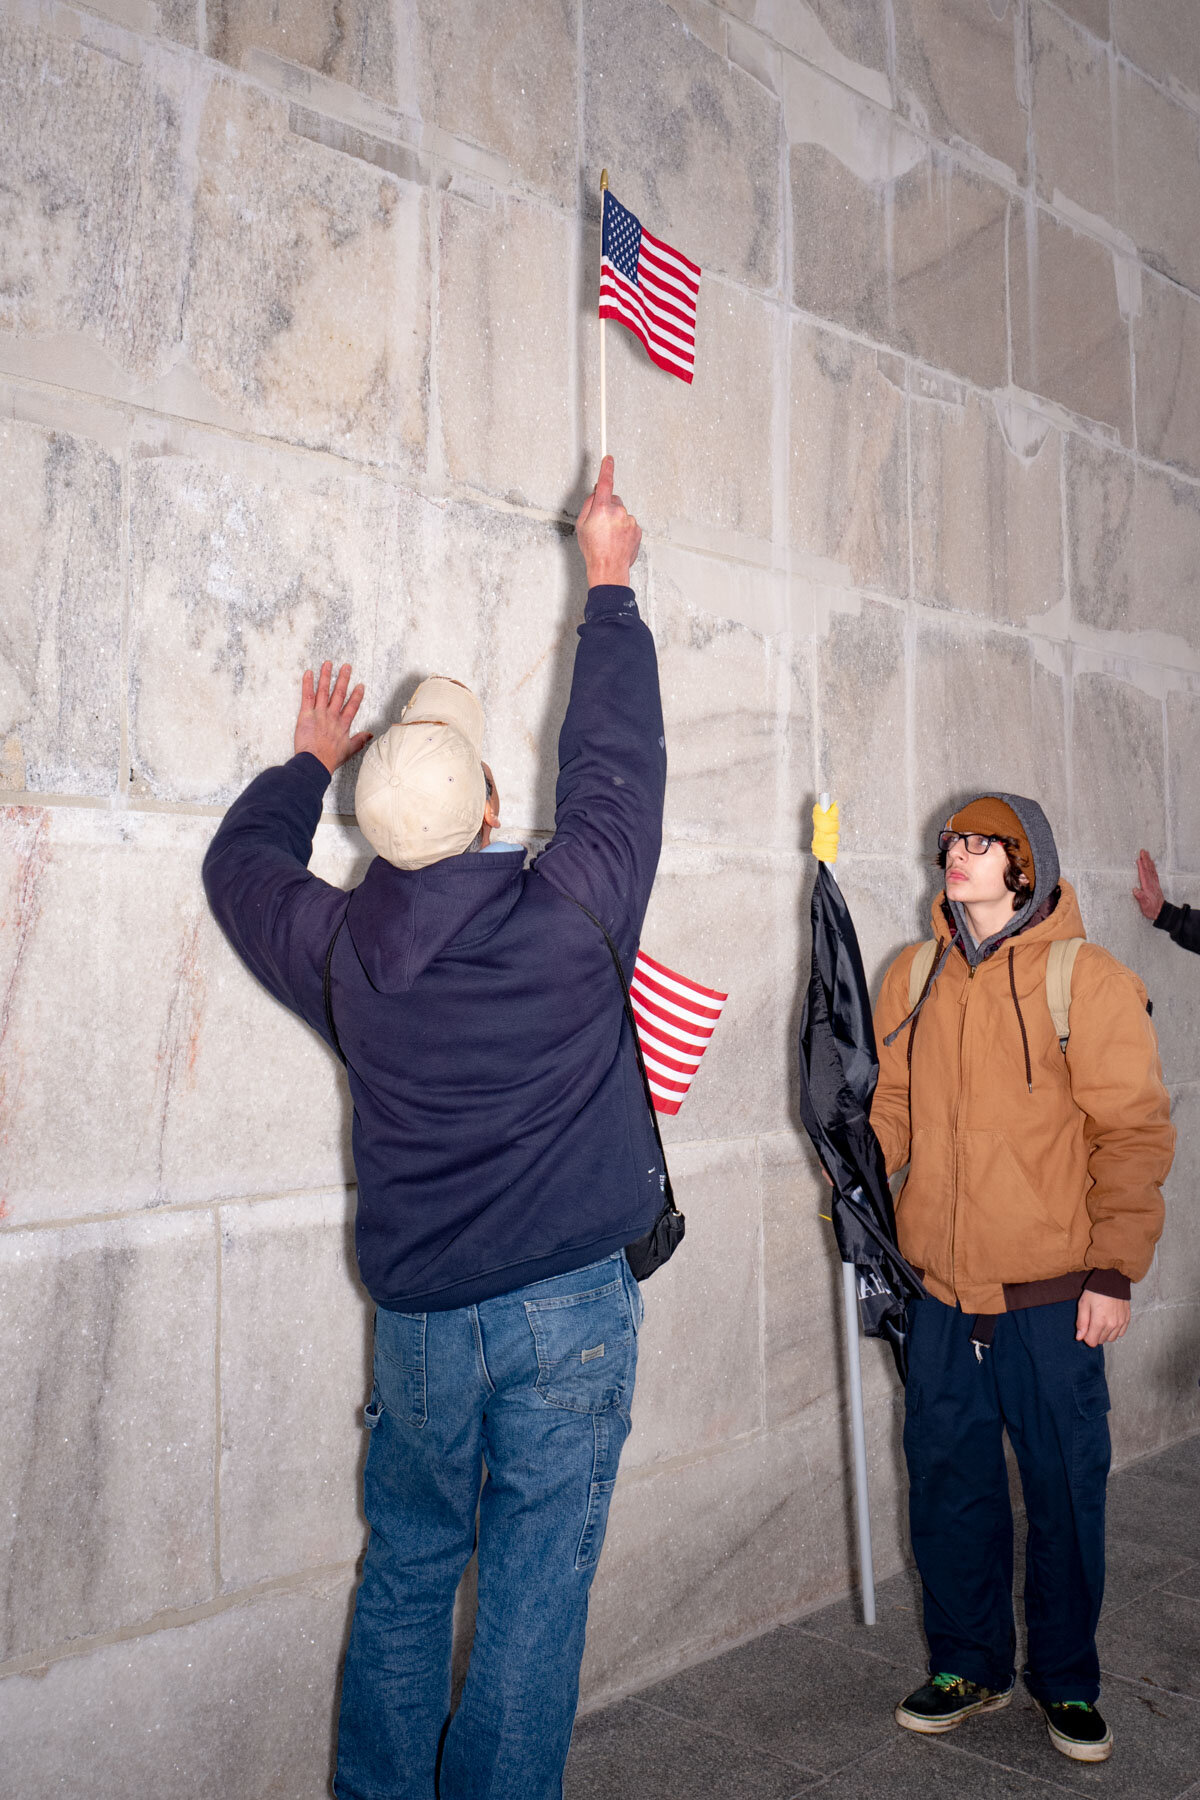  January 6th 2021 - Two trump supporters are touching the Washington Monument during the last Trump rally leading to the Storming of the Capitol in Washington. 